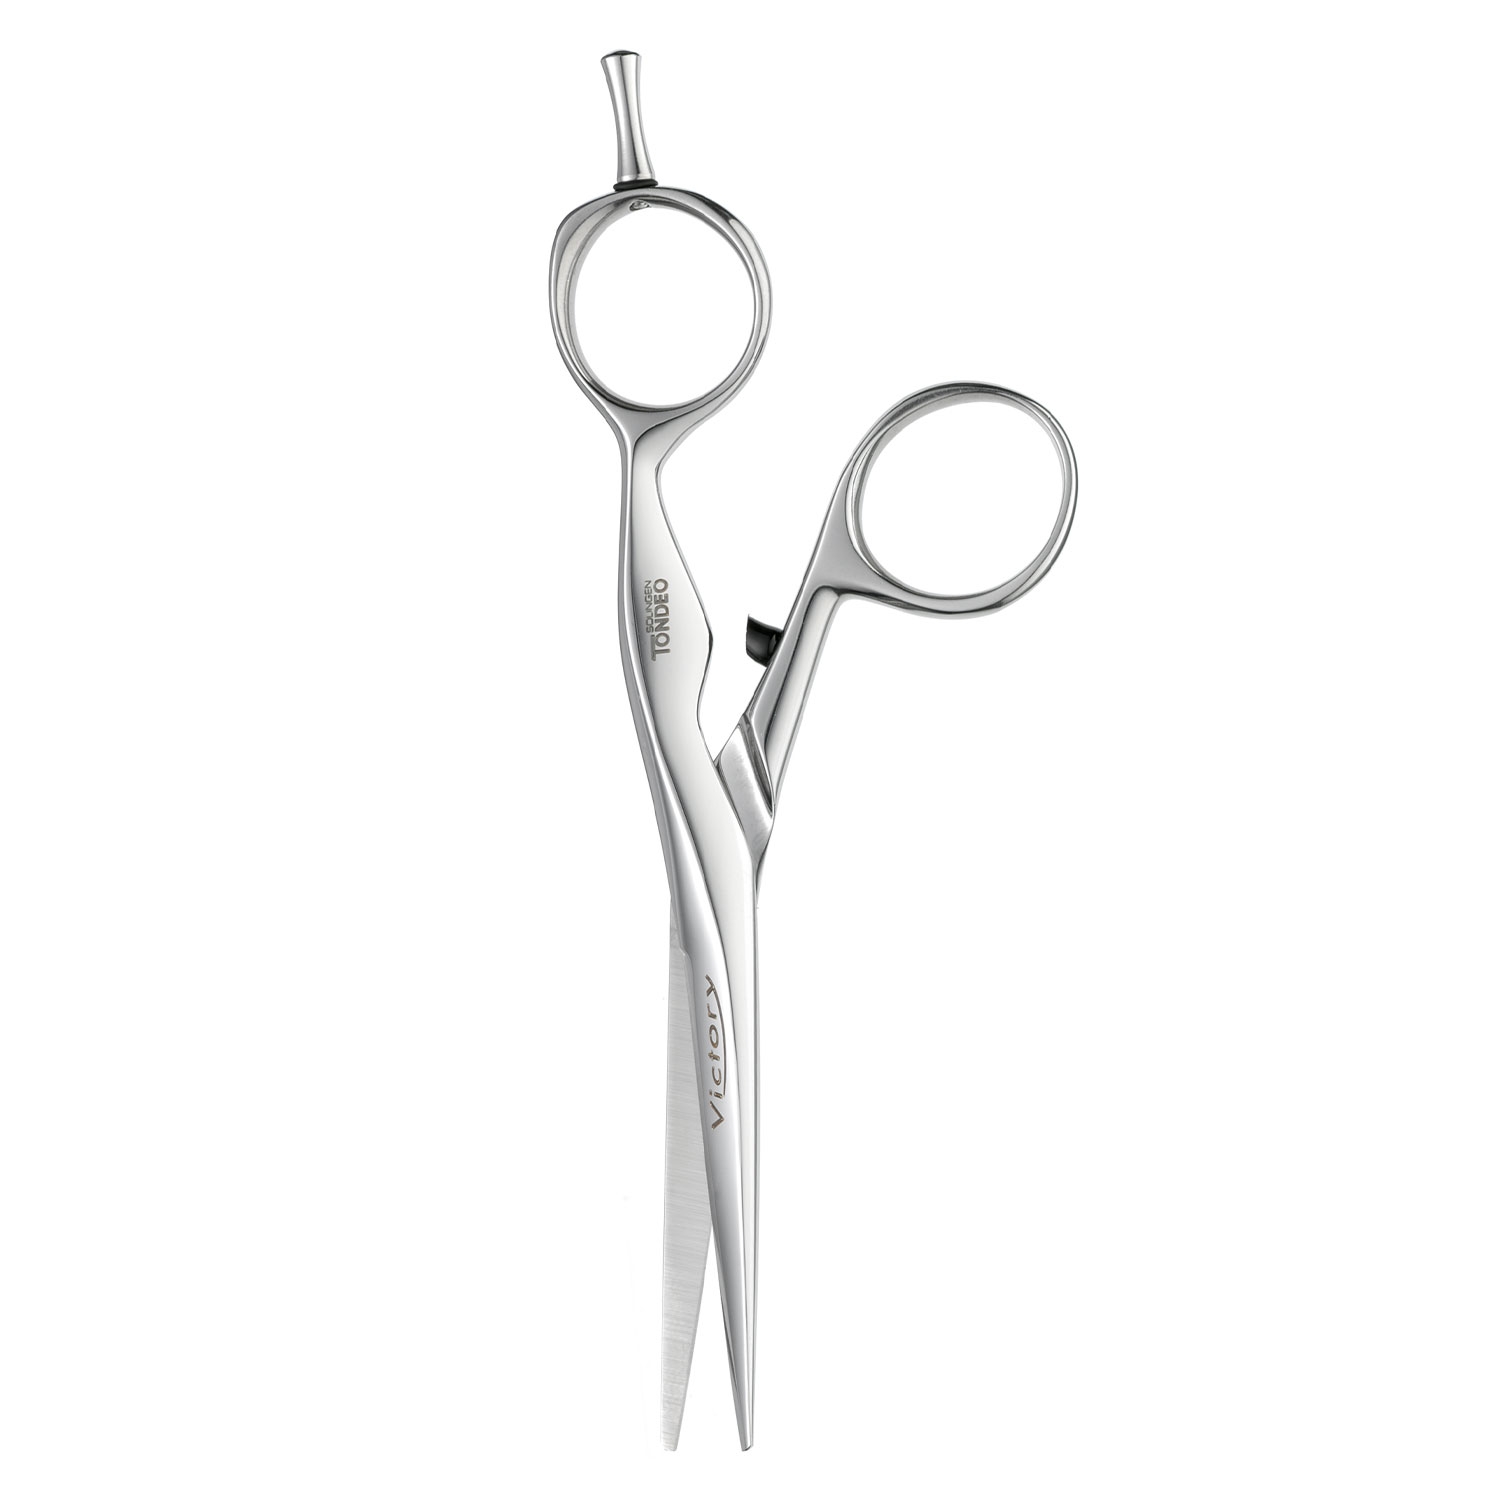 Product image from Tondeo Scissors - Victory Offset Scissors 5.5"